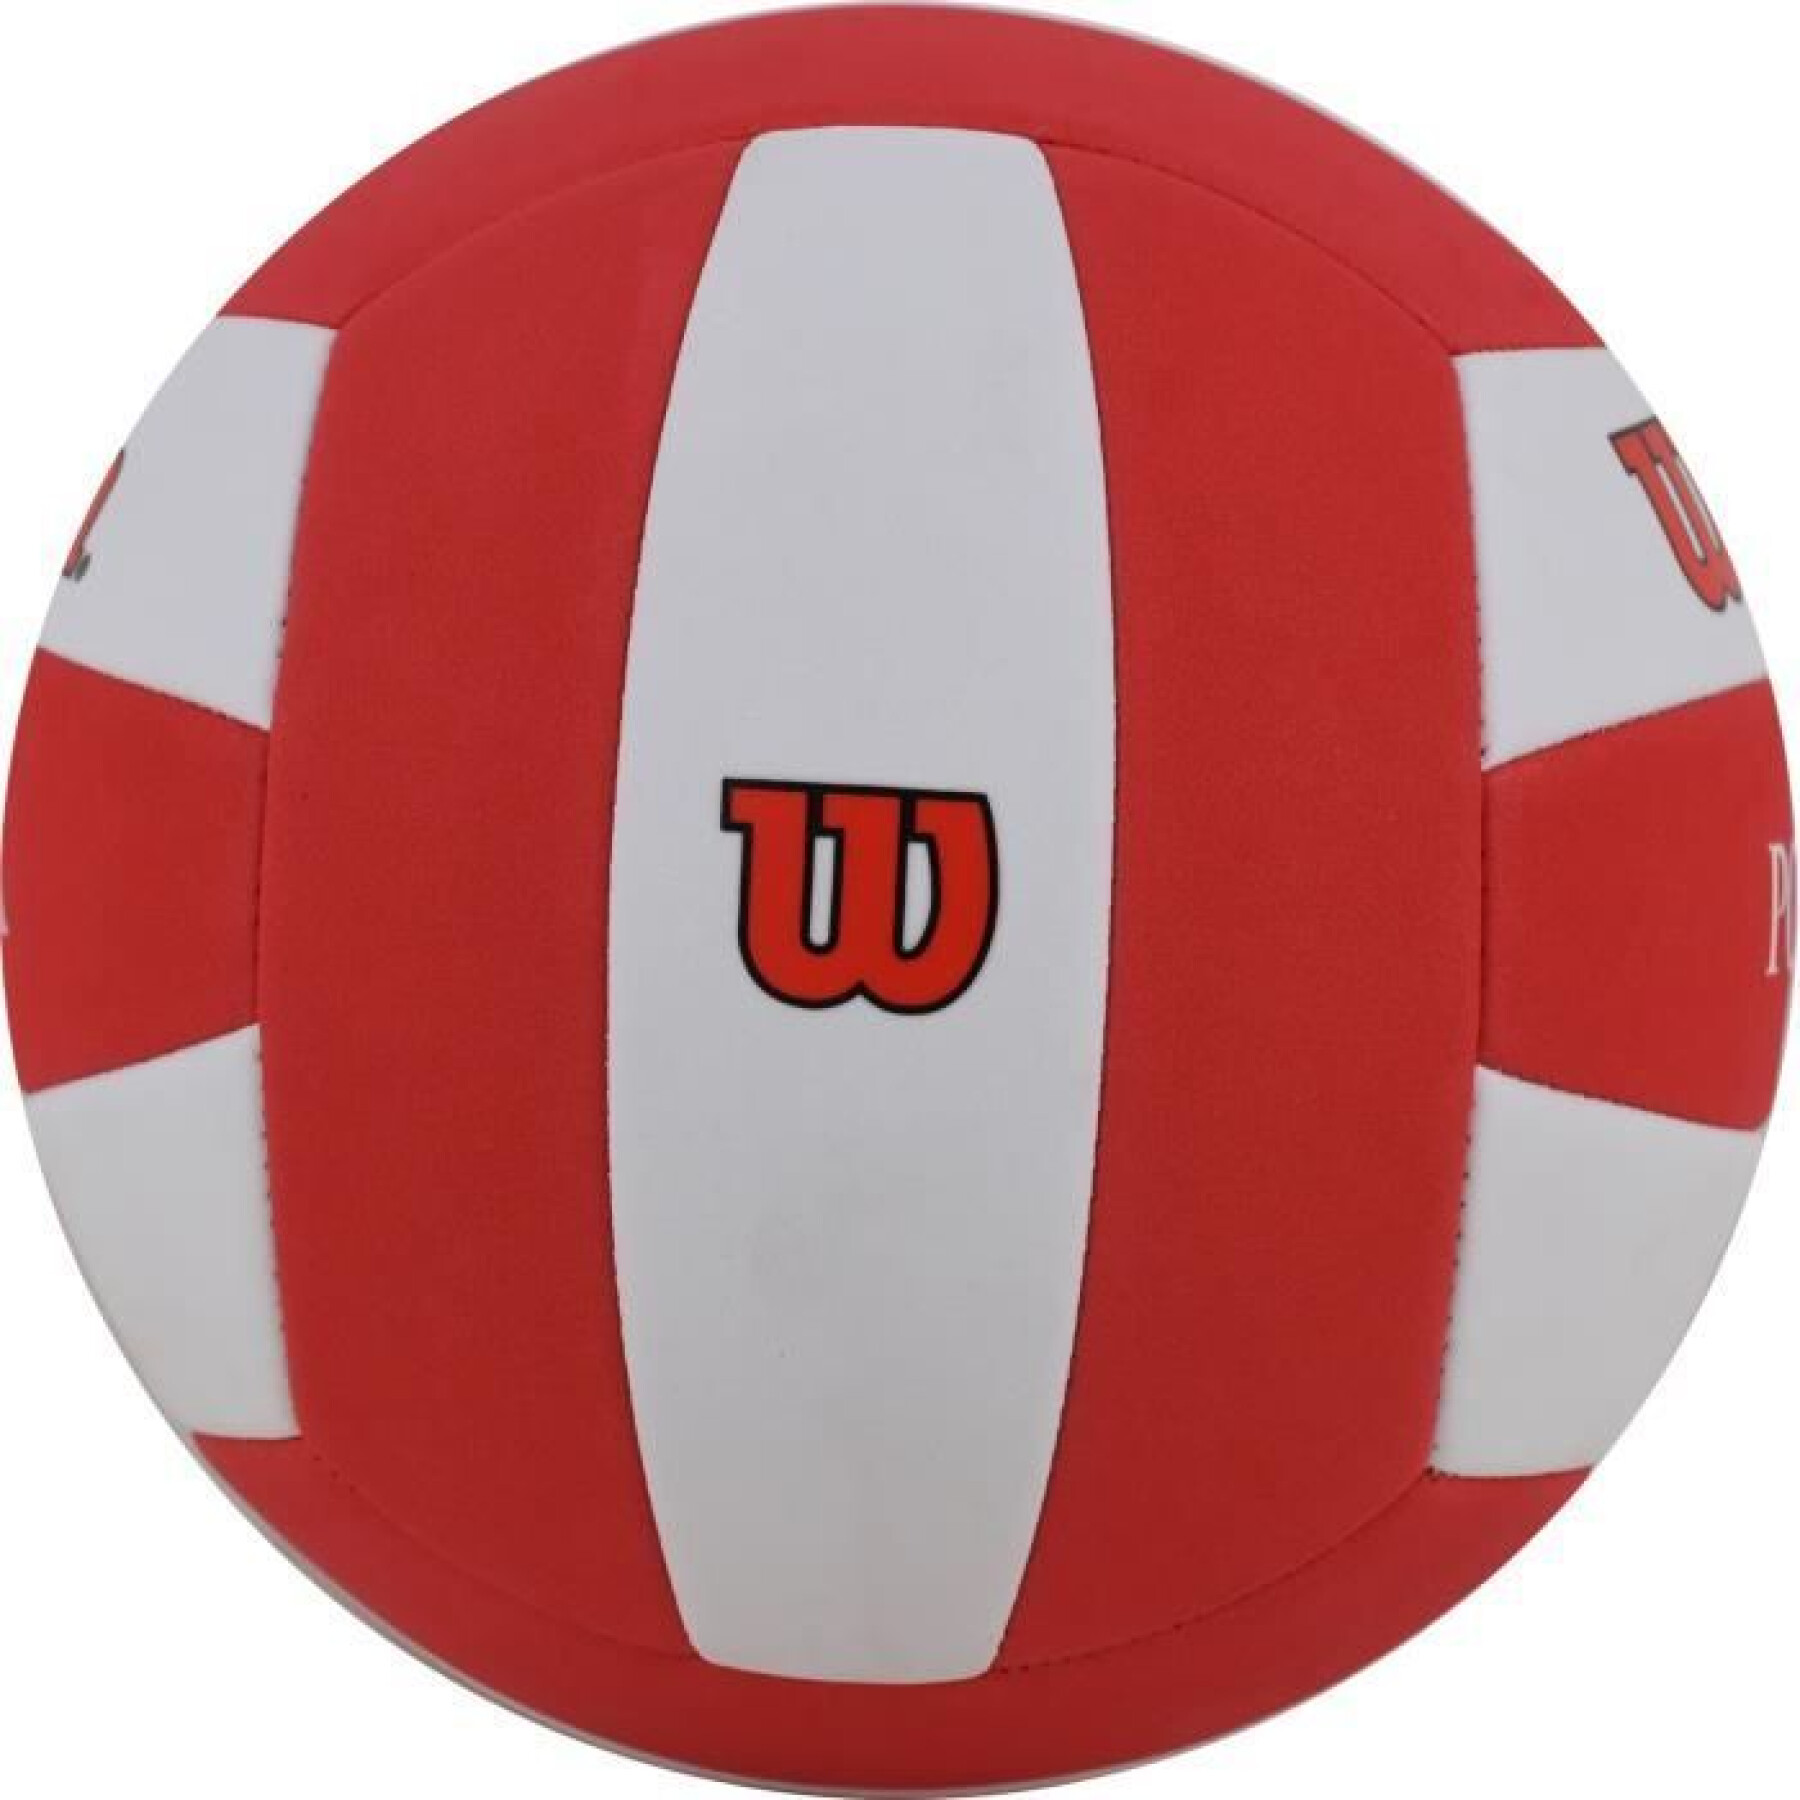 Volleyball ball Pologne Super Soft Play